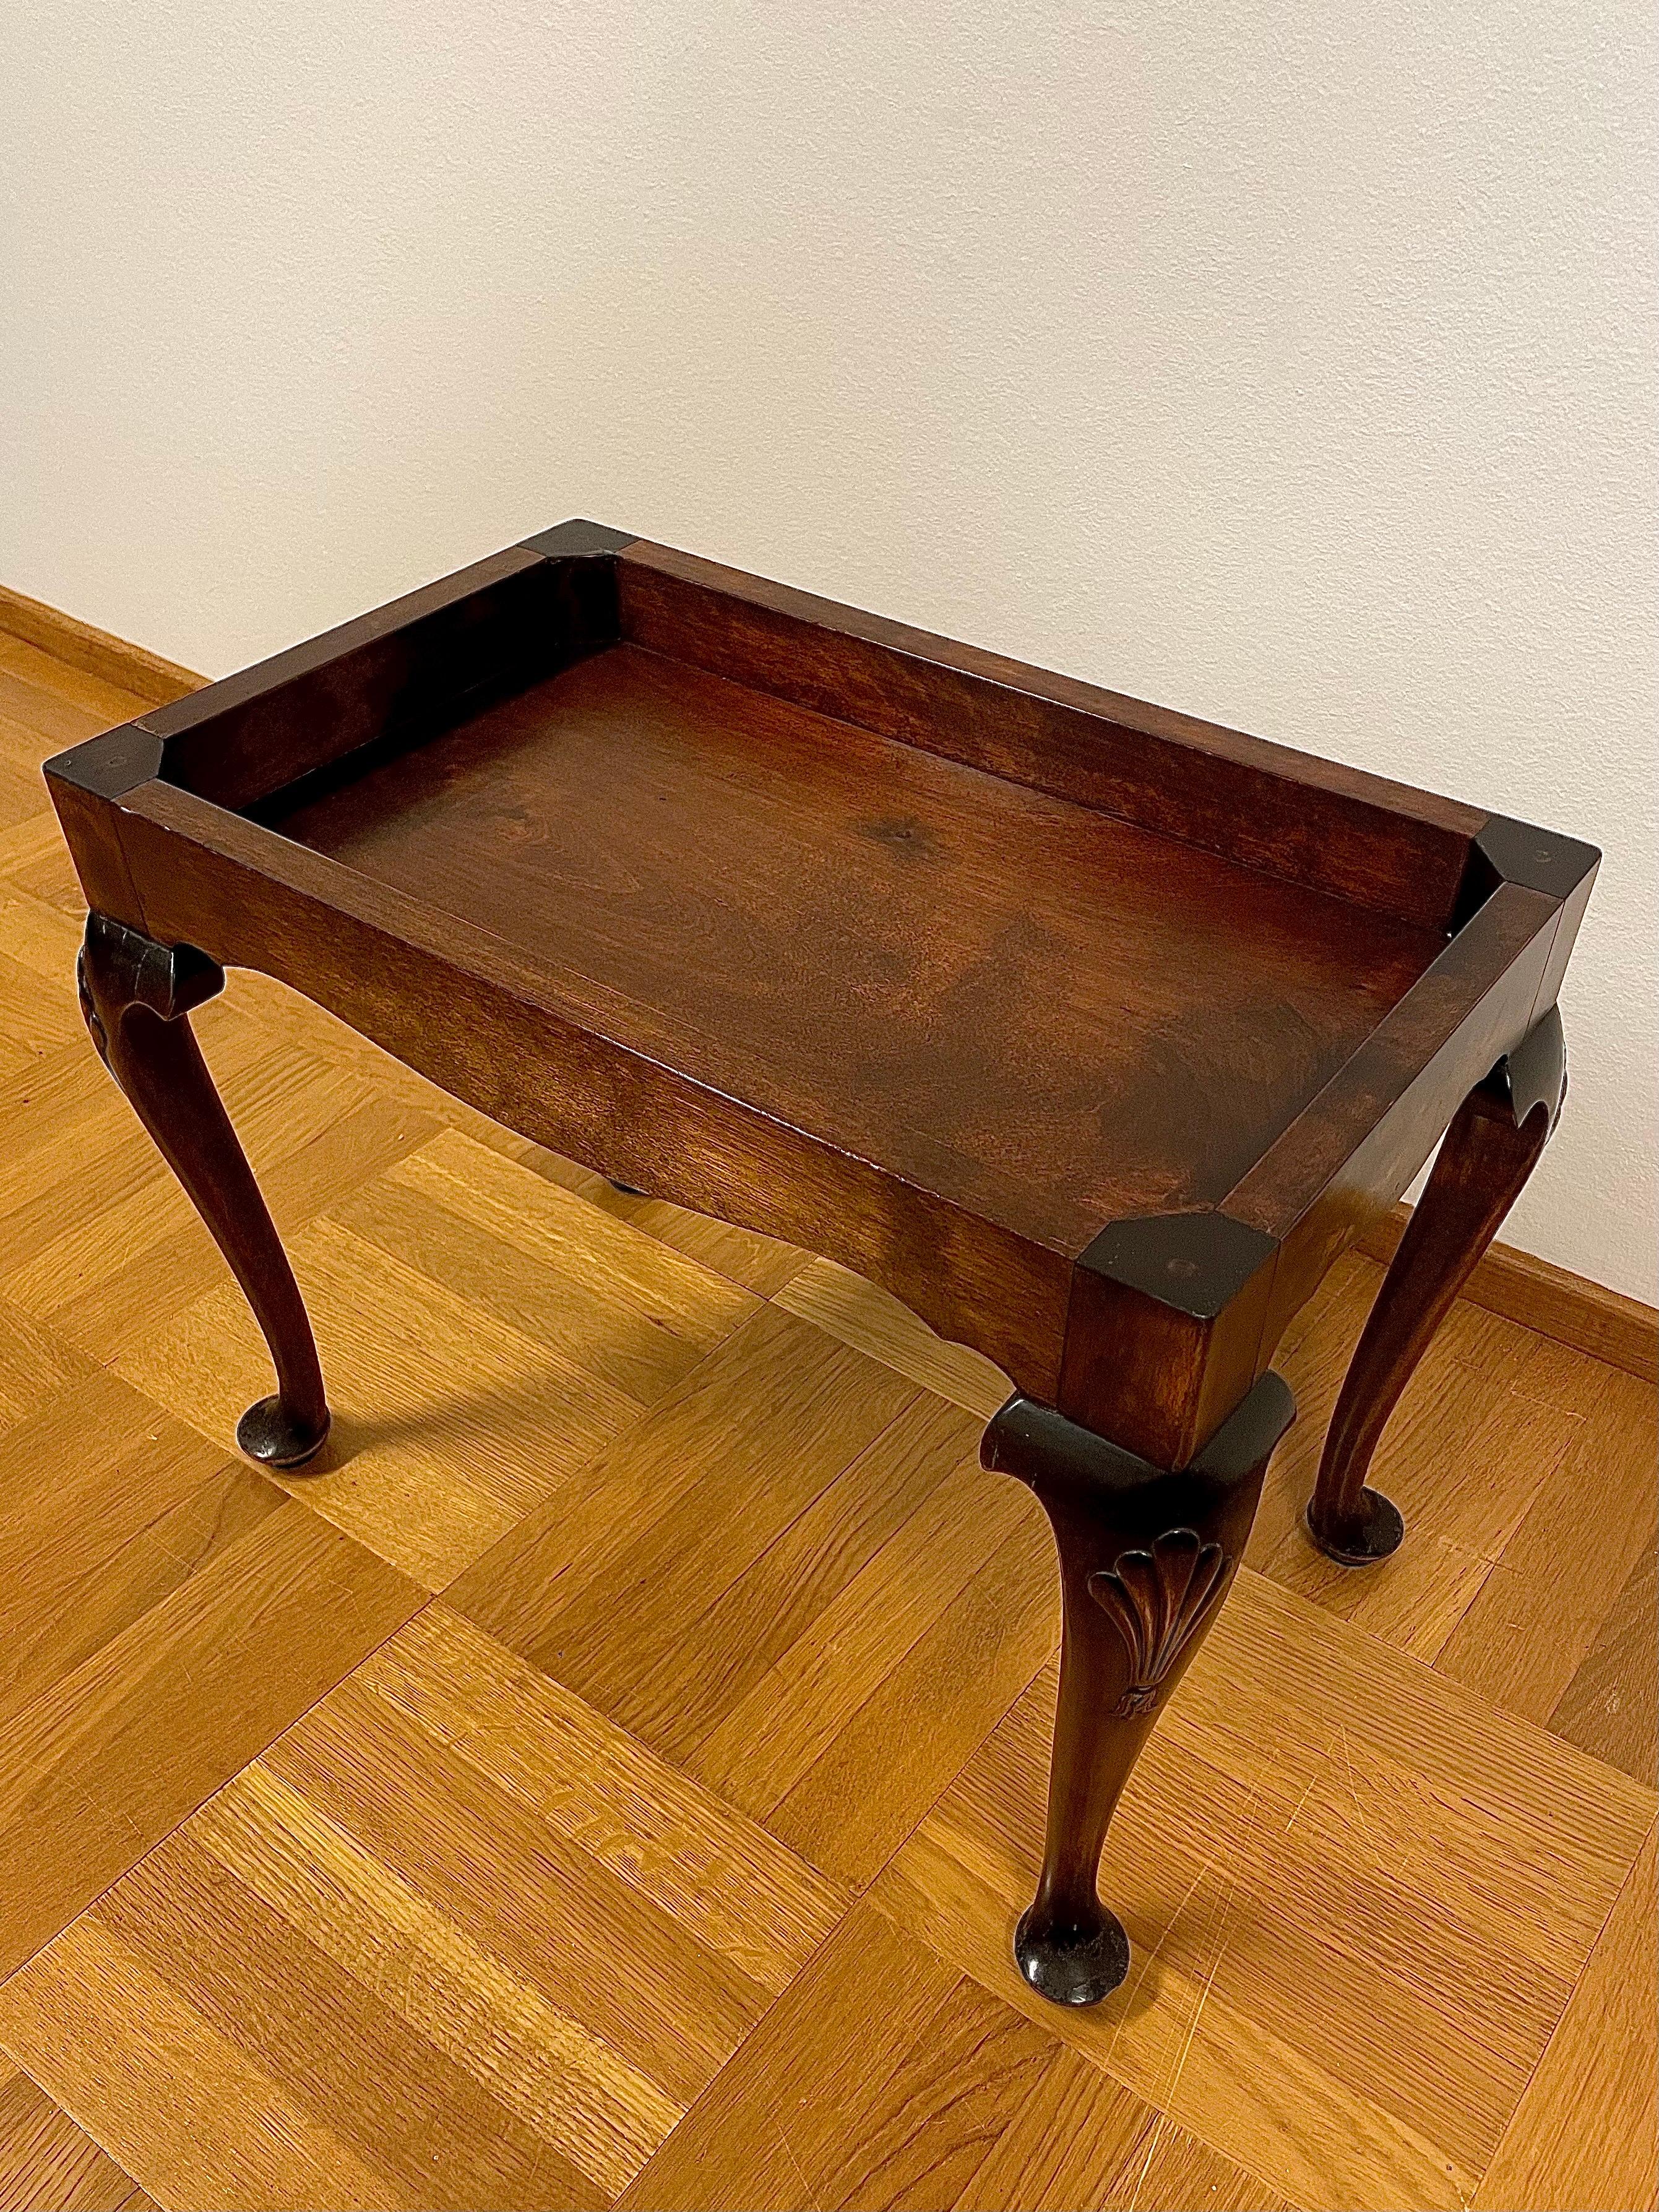 Swedish Tray Table in Stained Birch Manufactured 13/3 1929 by Nordiska Kompaniet For Sale 4